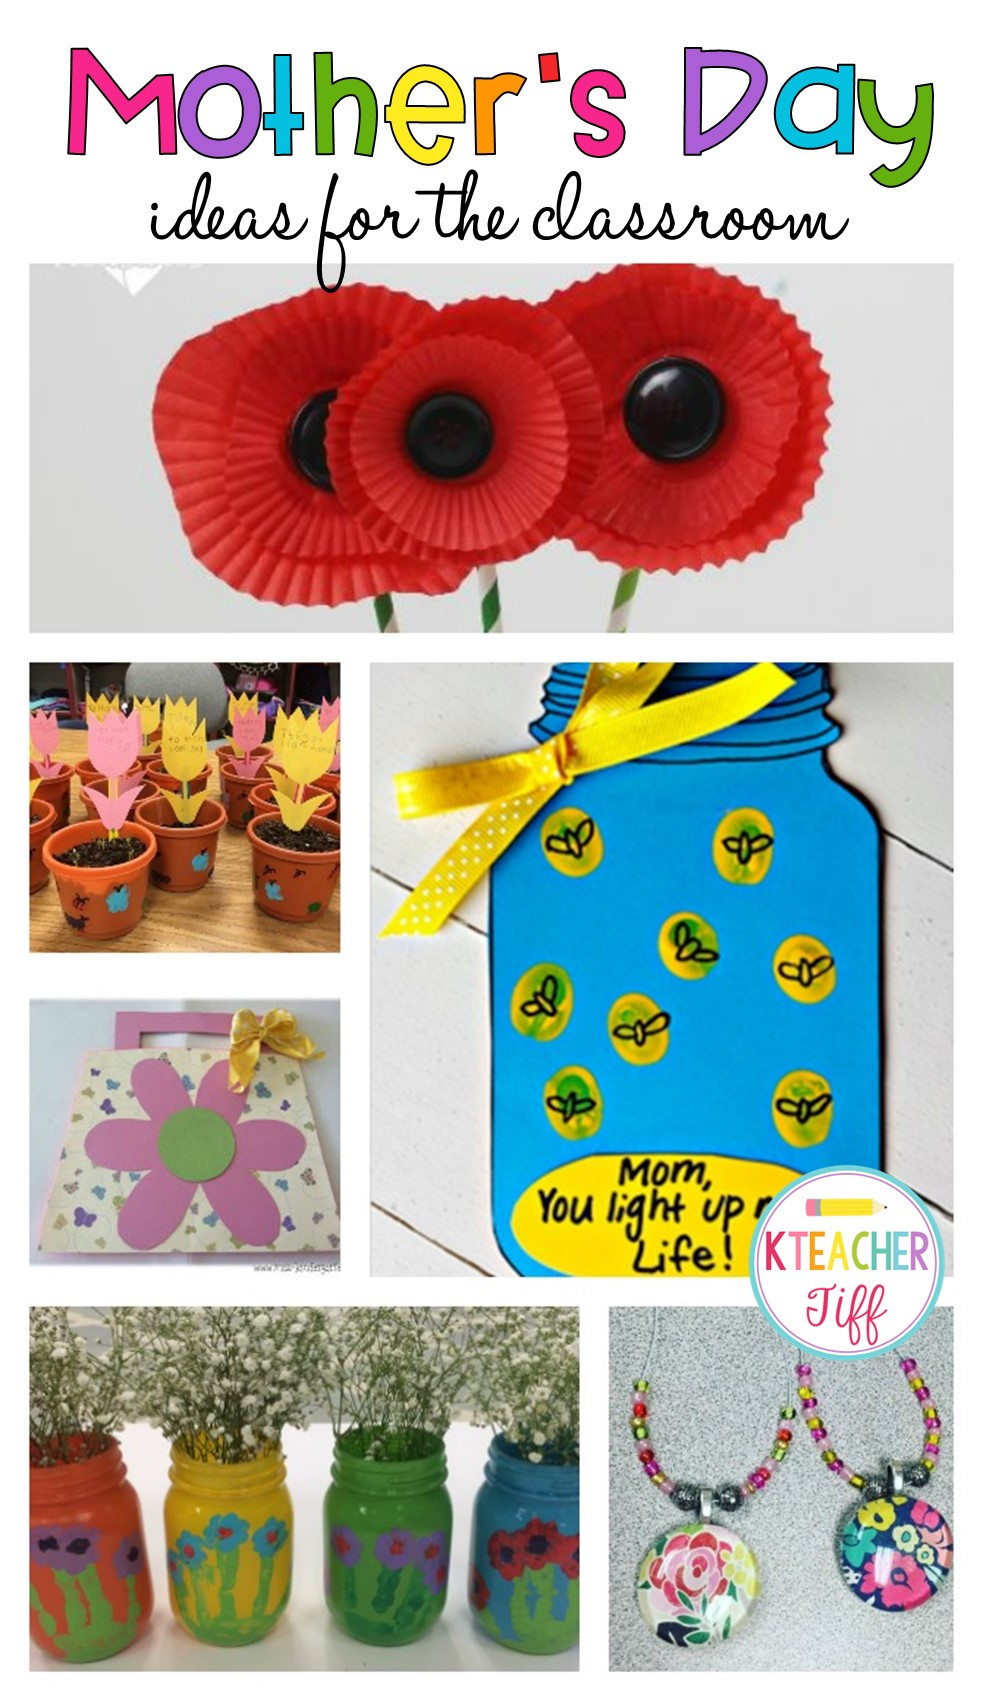 Mother'S Day Photo Gift Ideas
 Mother s Day Gift Ideas for the Classroom KTeacherTiff